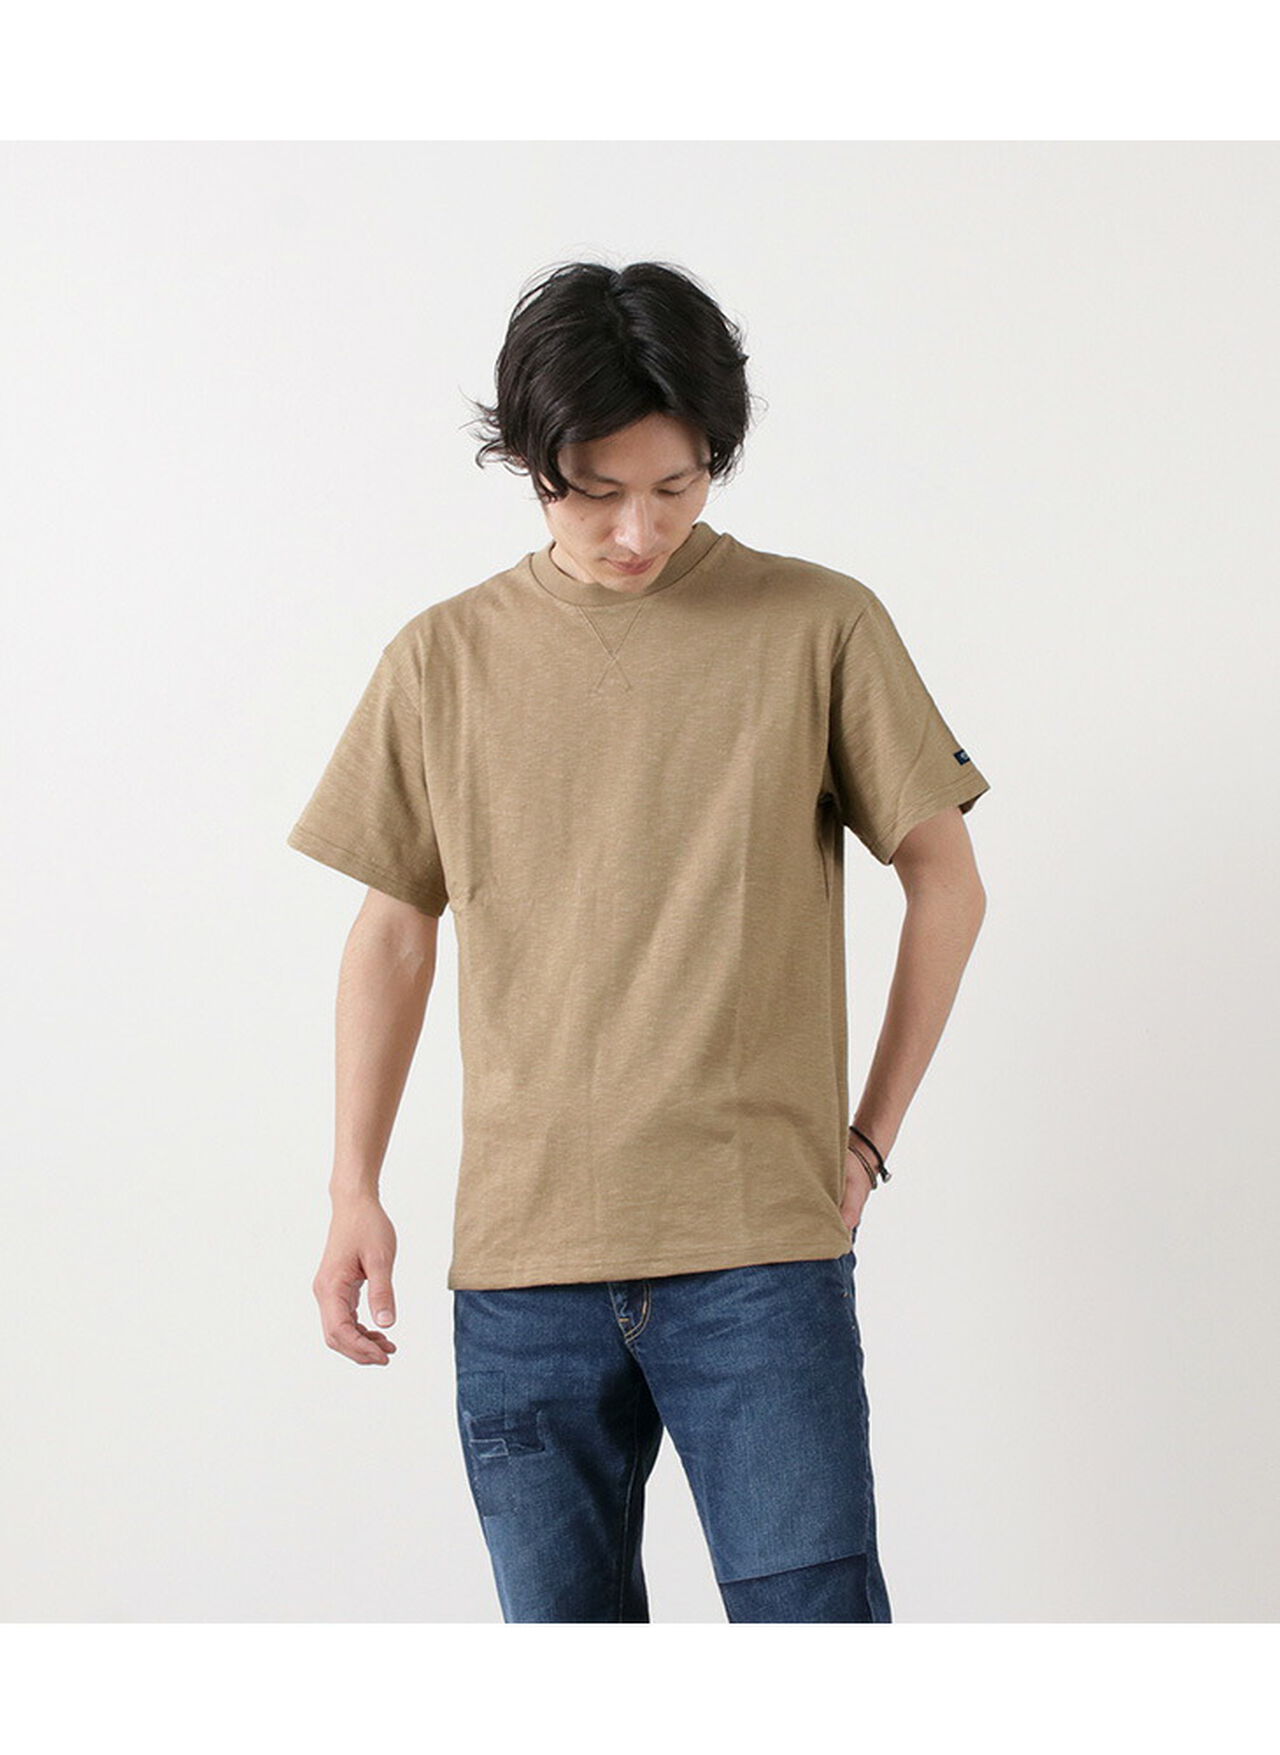 TE001SS HDCS Light Gusseted Crew T-Shirt,, large image number 6